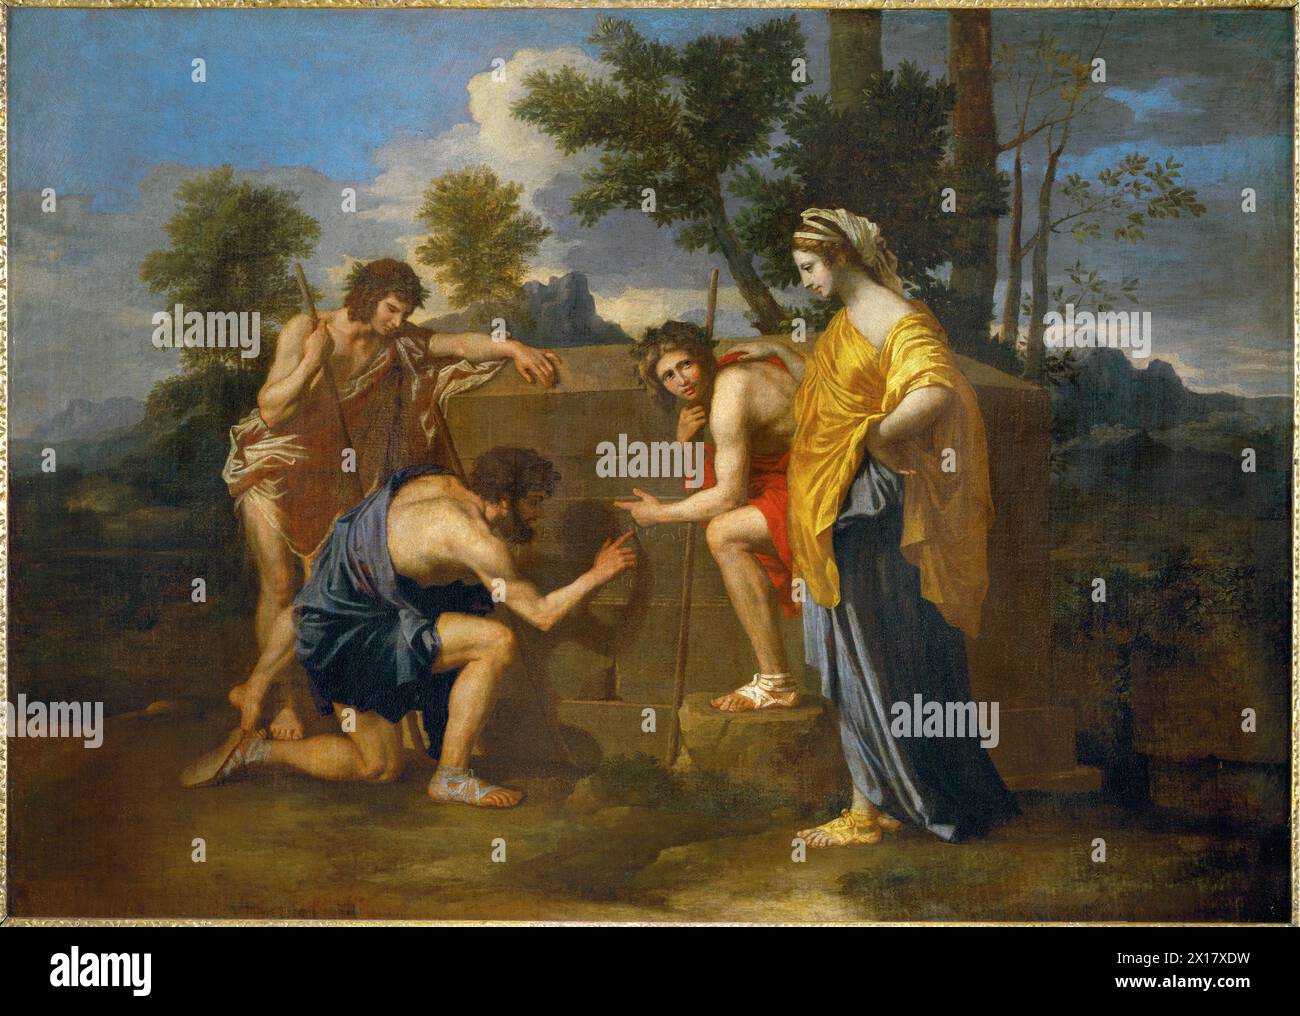 Et in Arcadia ego (also known as Les bergers d'Arcadie or The Arcadian Shepherds)[1] is a 1637–38 painting by Nicolas Poussin (1594–1665), the leading painter of the classical French Baroque style. It depicts a pastoral scene with idealized shepherds from classical antiquity, Stock Photo